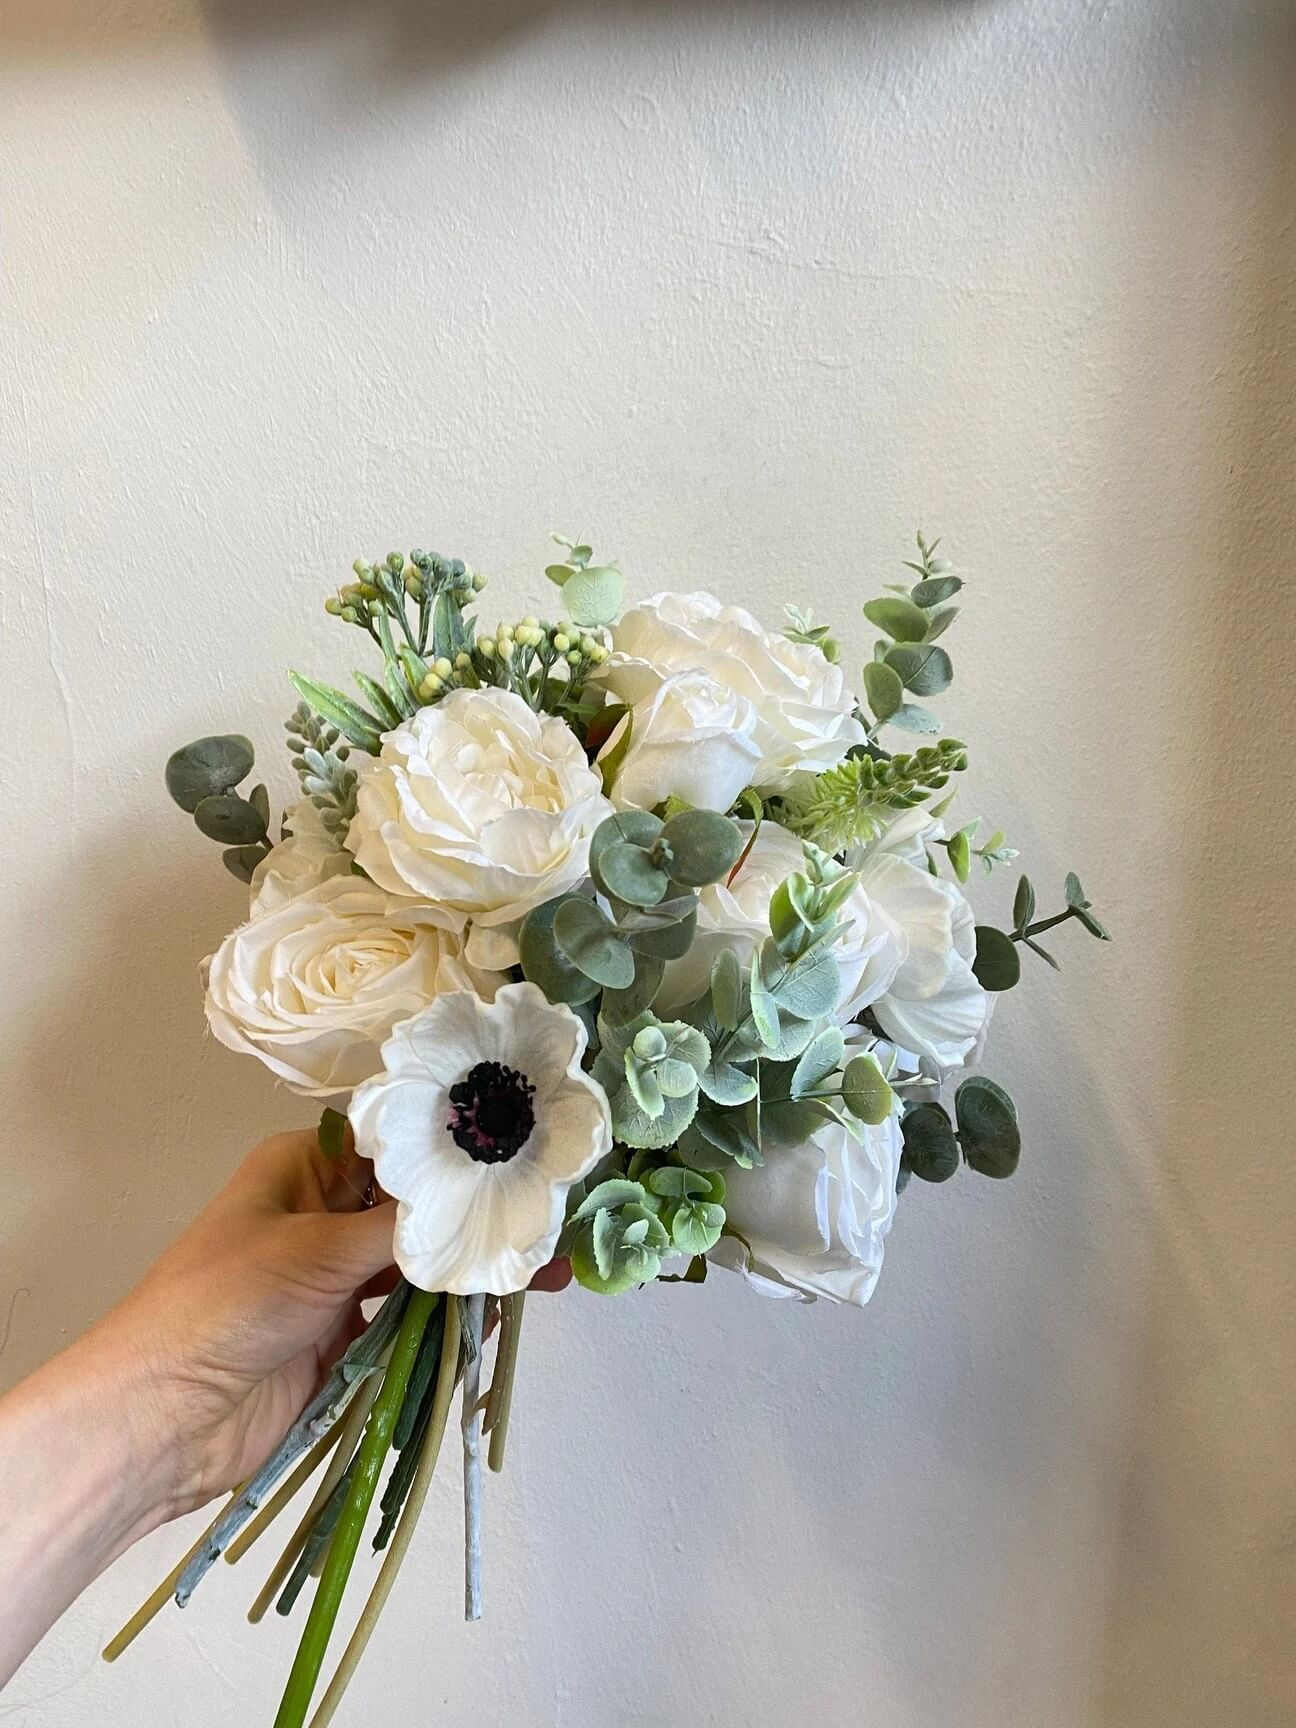 White peonies and roses, vintage wedding flowers from Hidden Botanics.